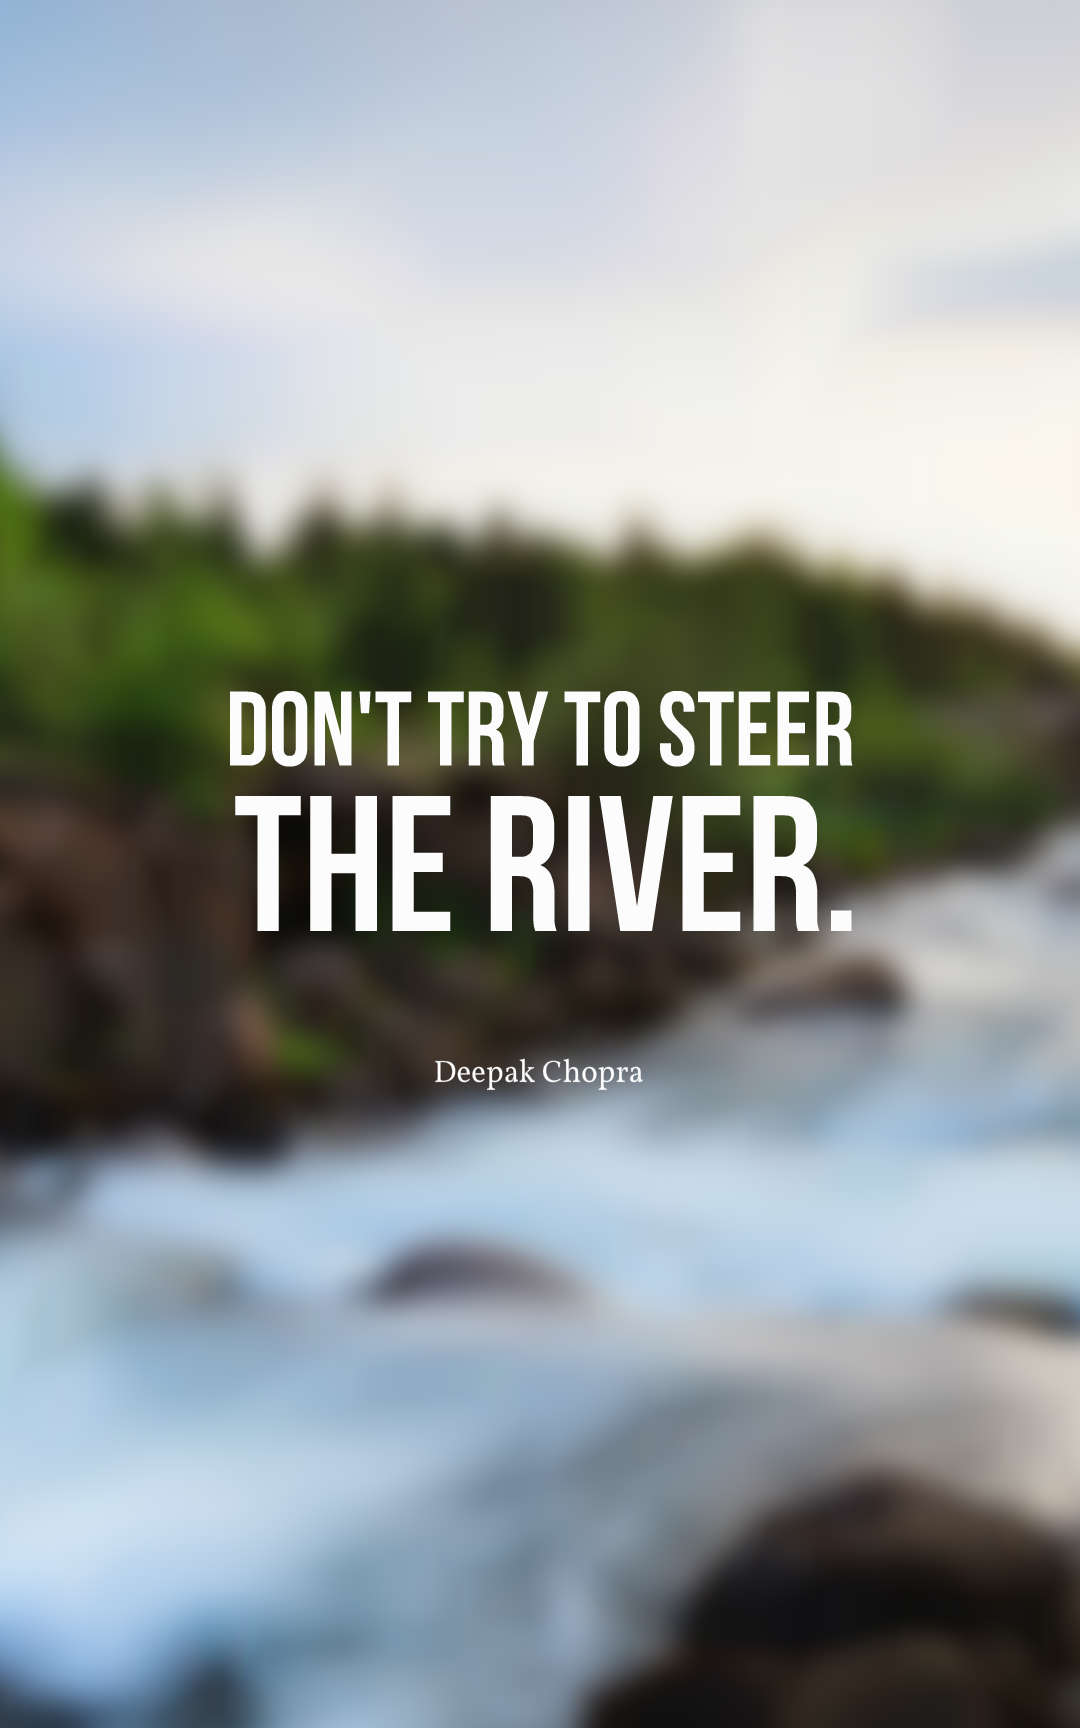 Don't try to steer the river.